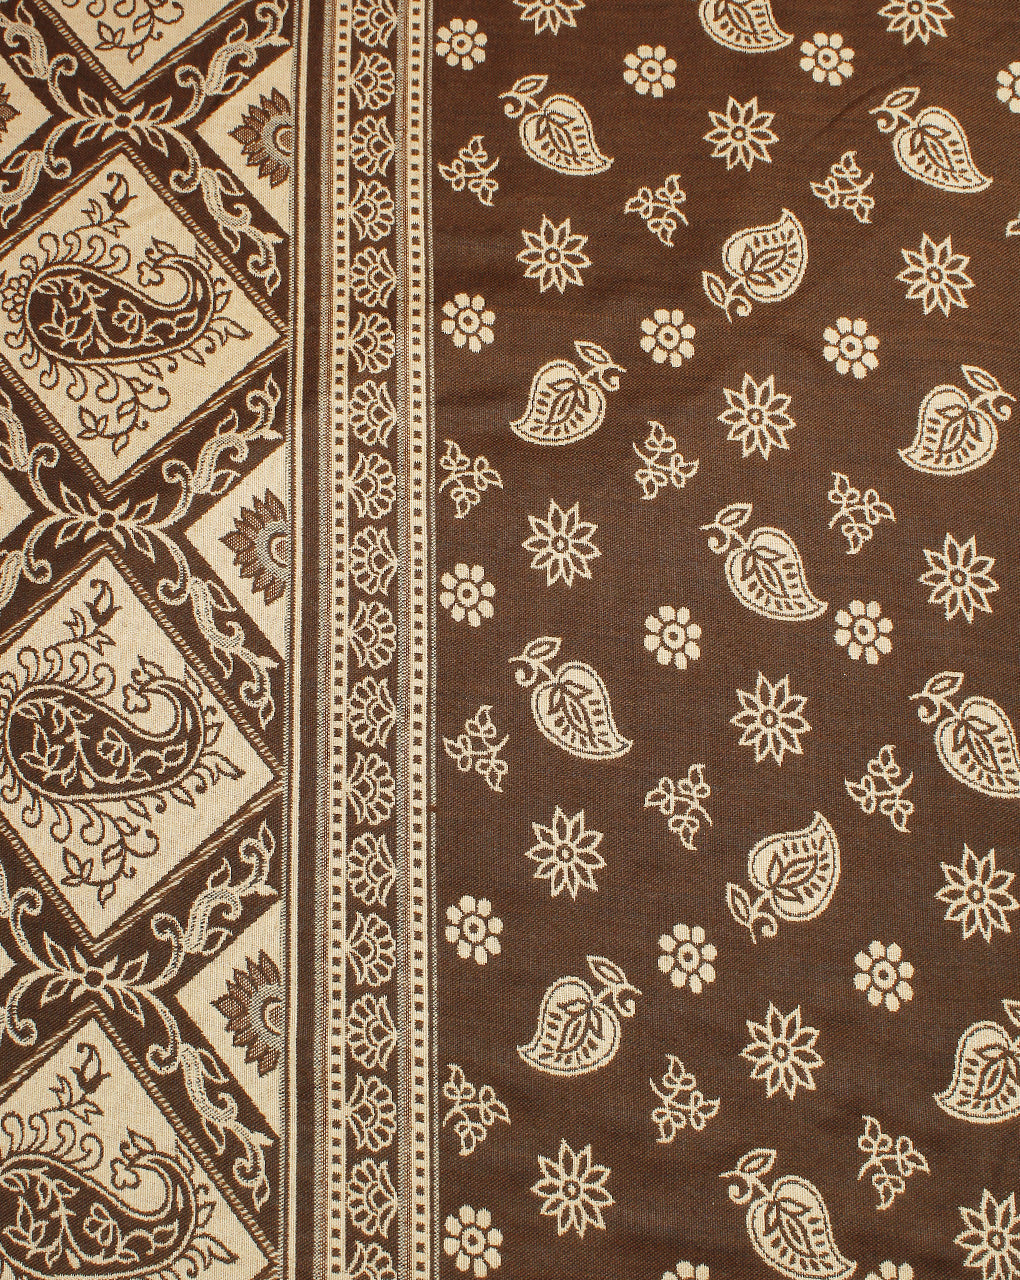 Brown And Cream Floral Design Acrylic Woolen Fabric